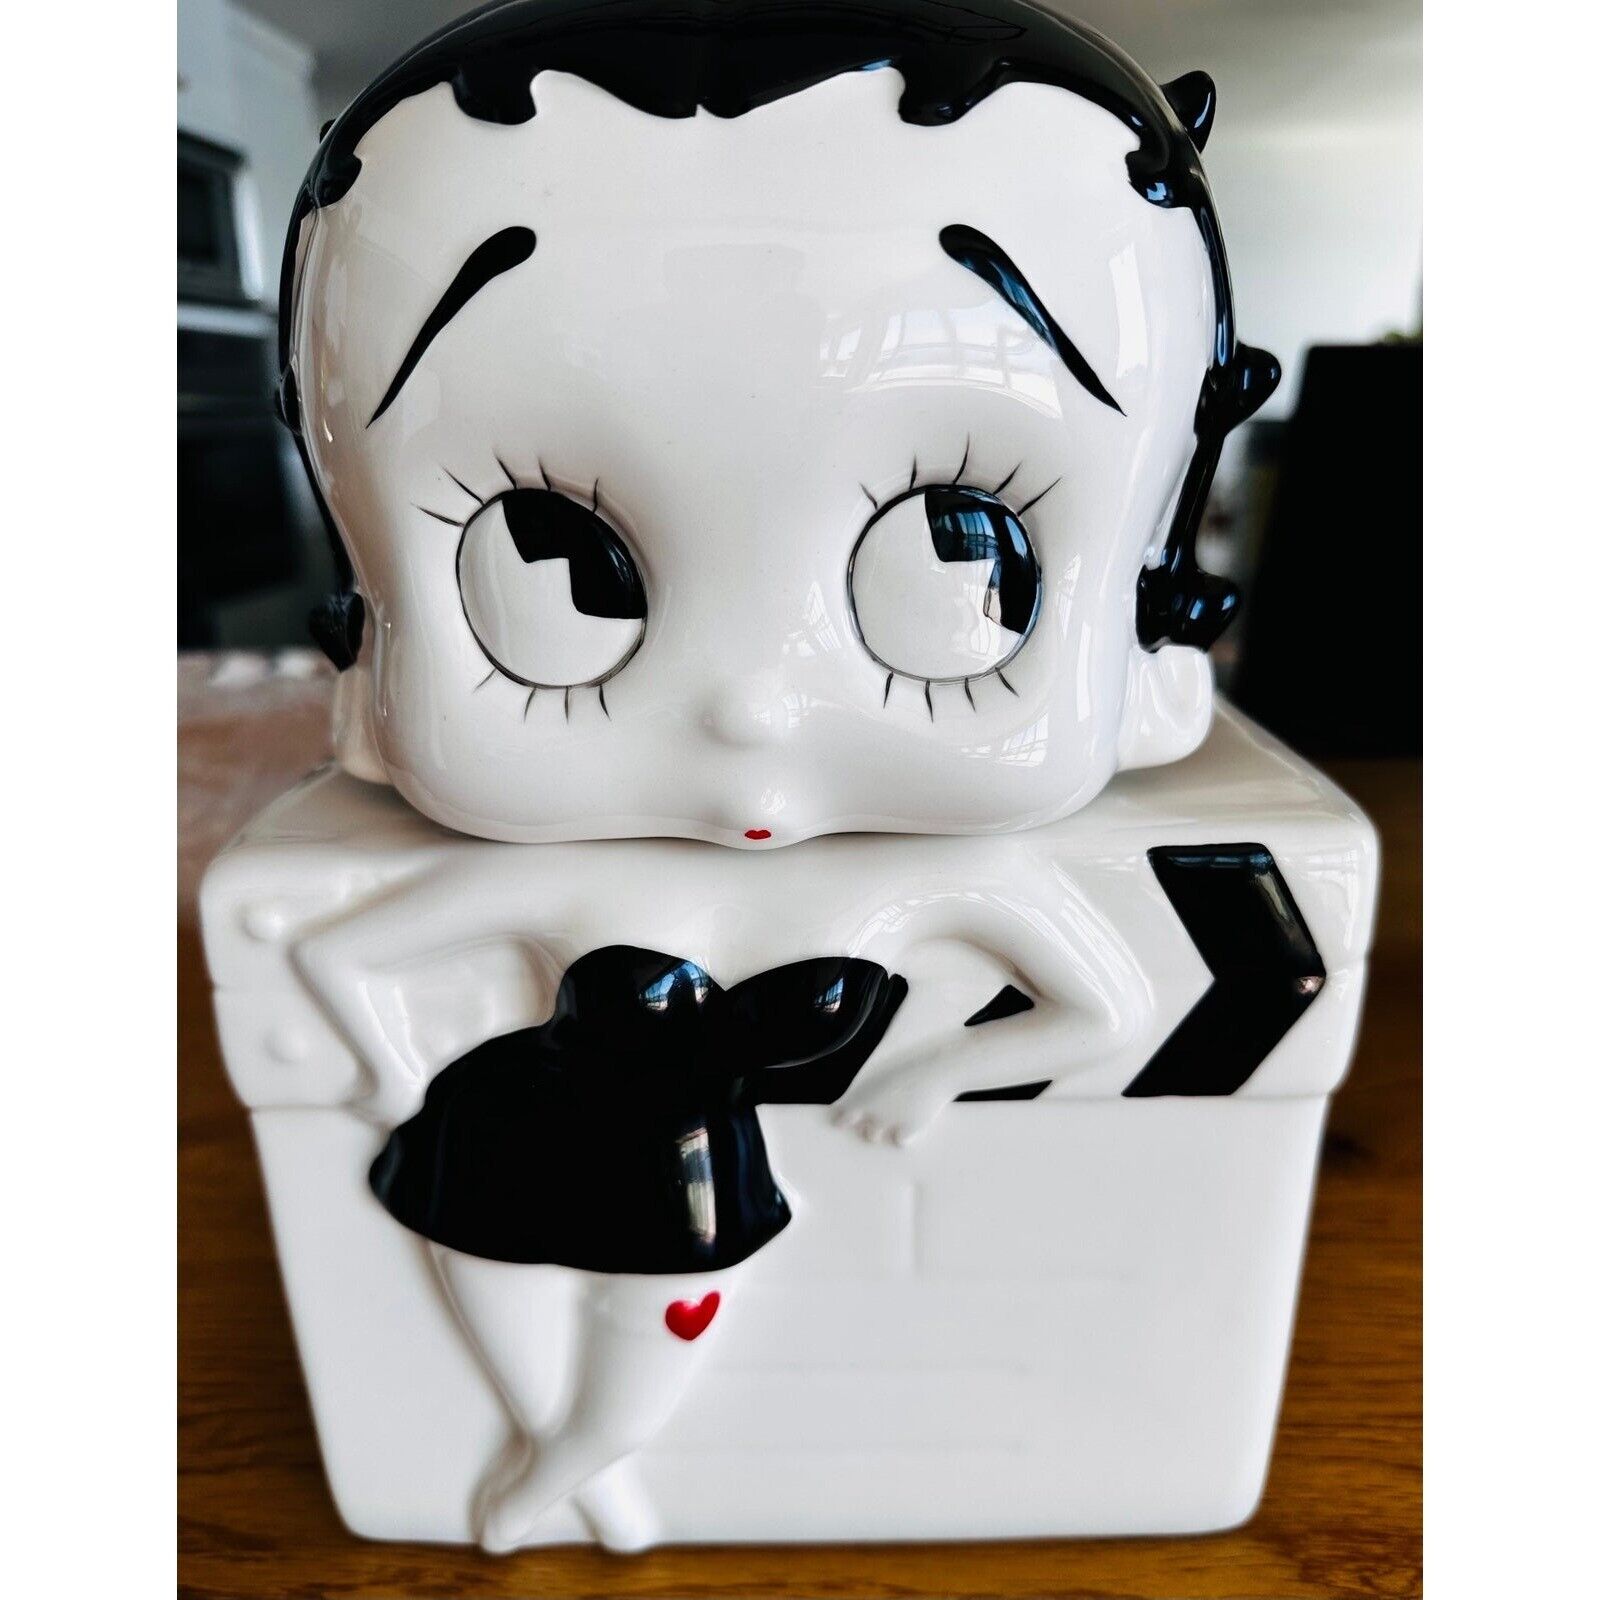 Vintage 1995 BENJAMIN MEDWIN BETTY BOOP COOKIE JAR BLACK AND WHITE NEW IN BOX